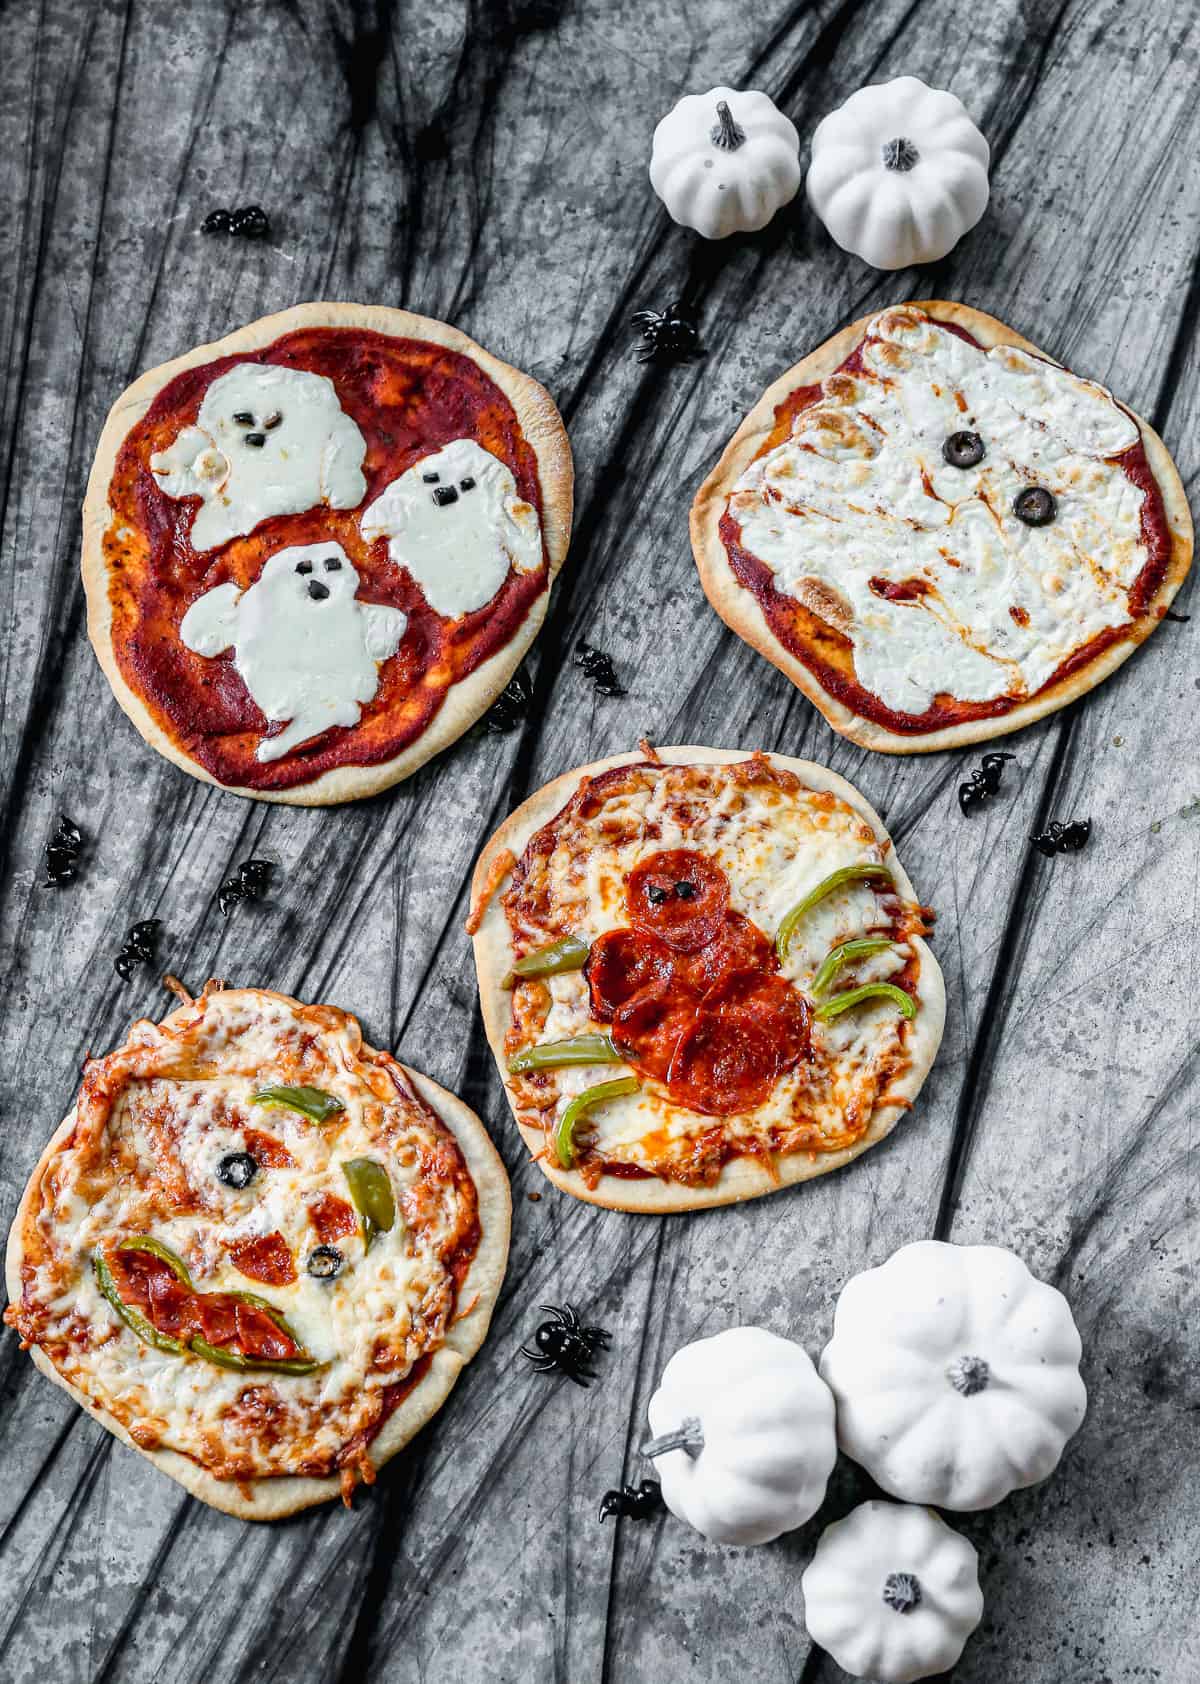 Four themed Halloween Pizzas made with different toppings.